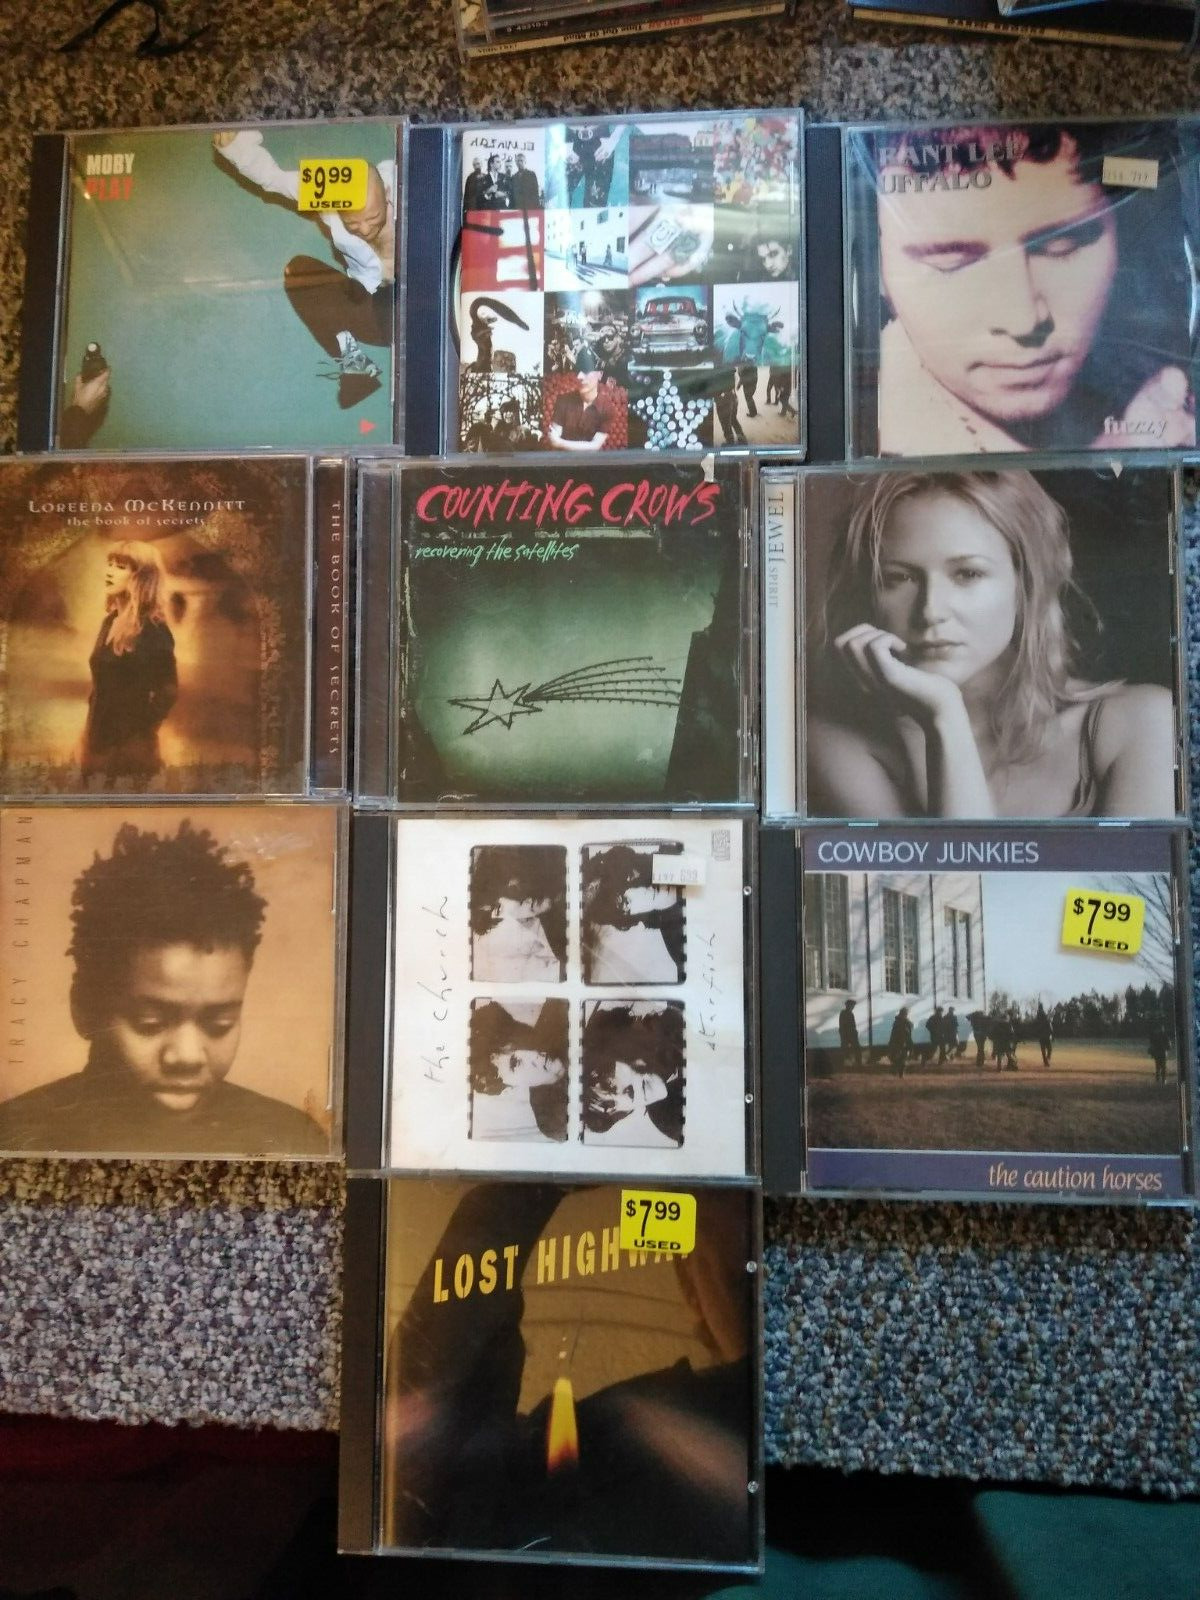 Lot of 10 90’s Rock CD  - U2, Counting Crows, Jewel, Cowboy Junkies, The Church